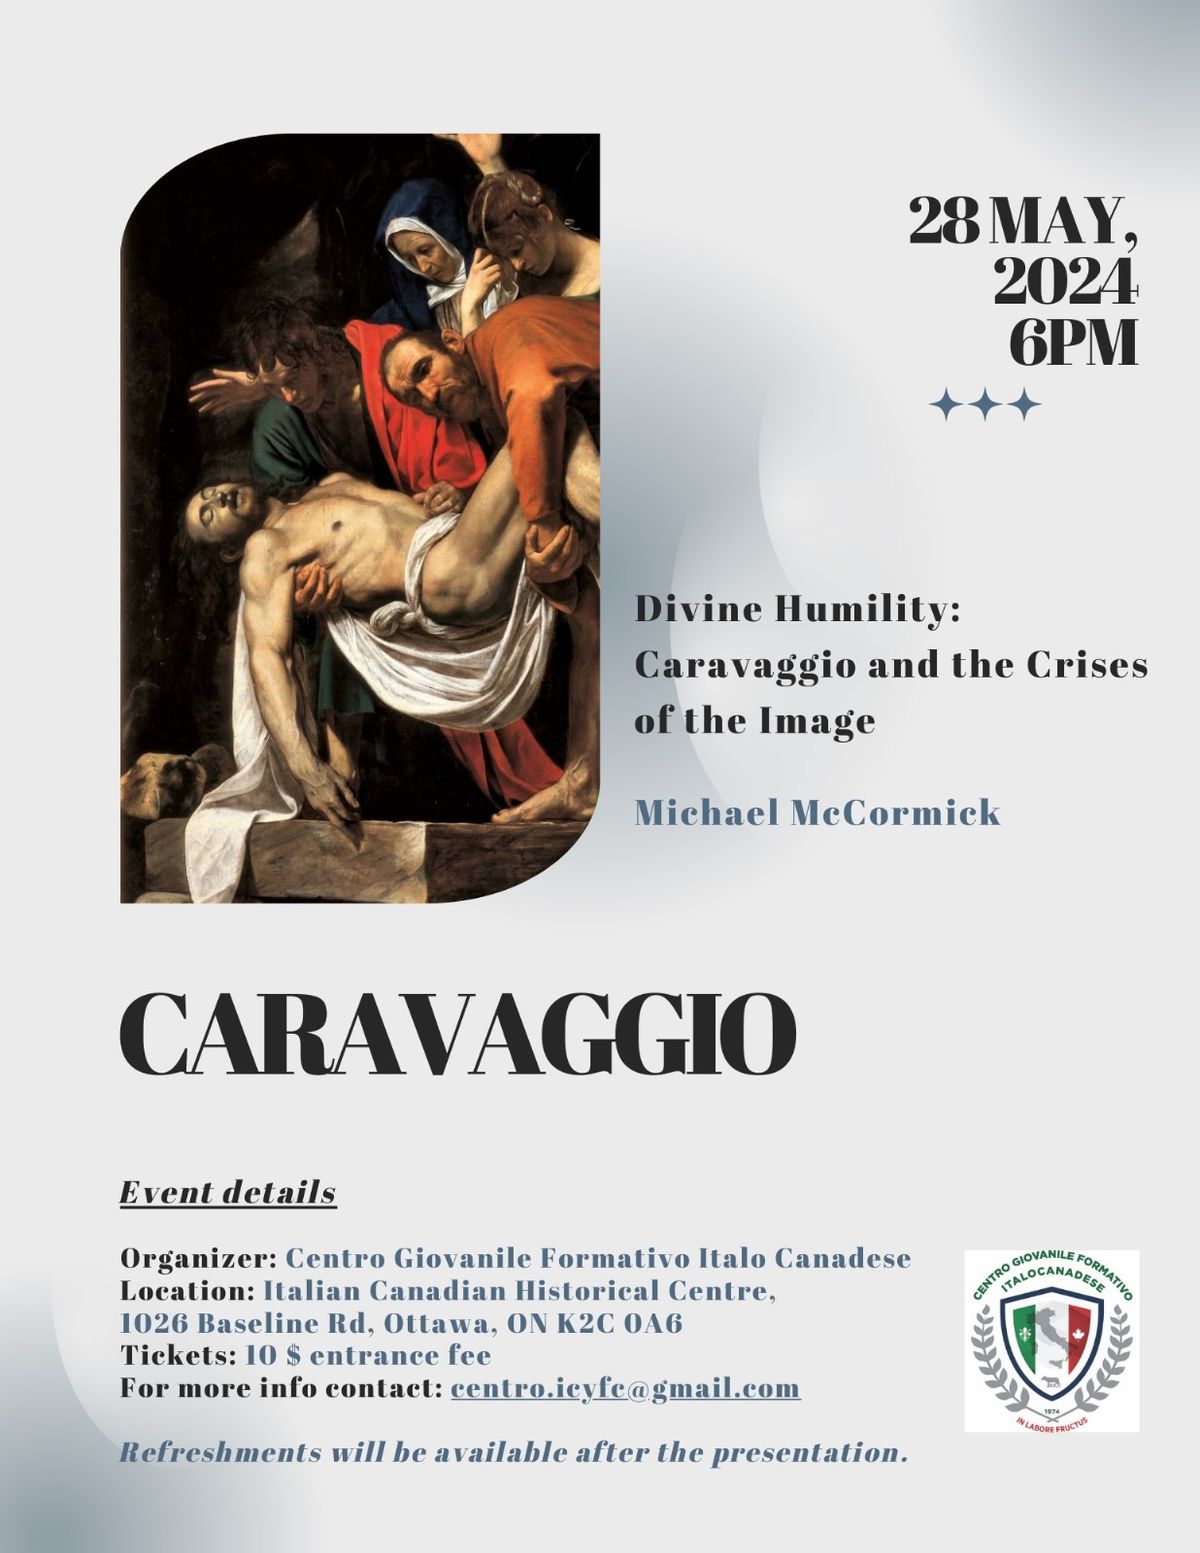 Divine Humility: Caravaggio and the Crises of the Image